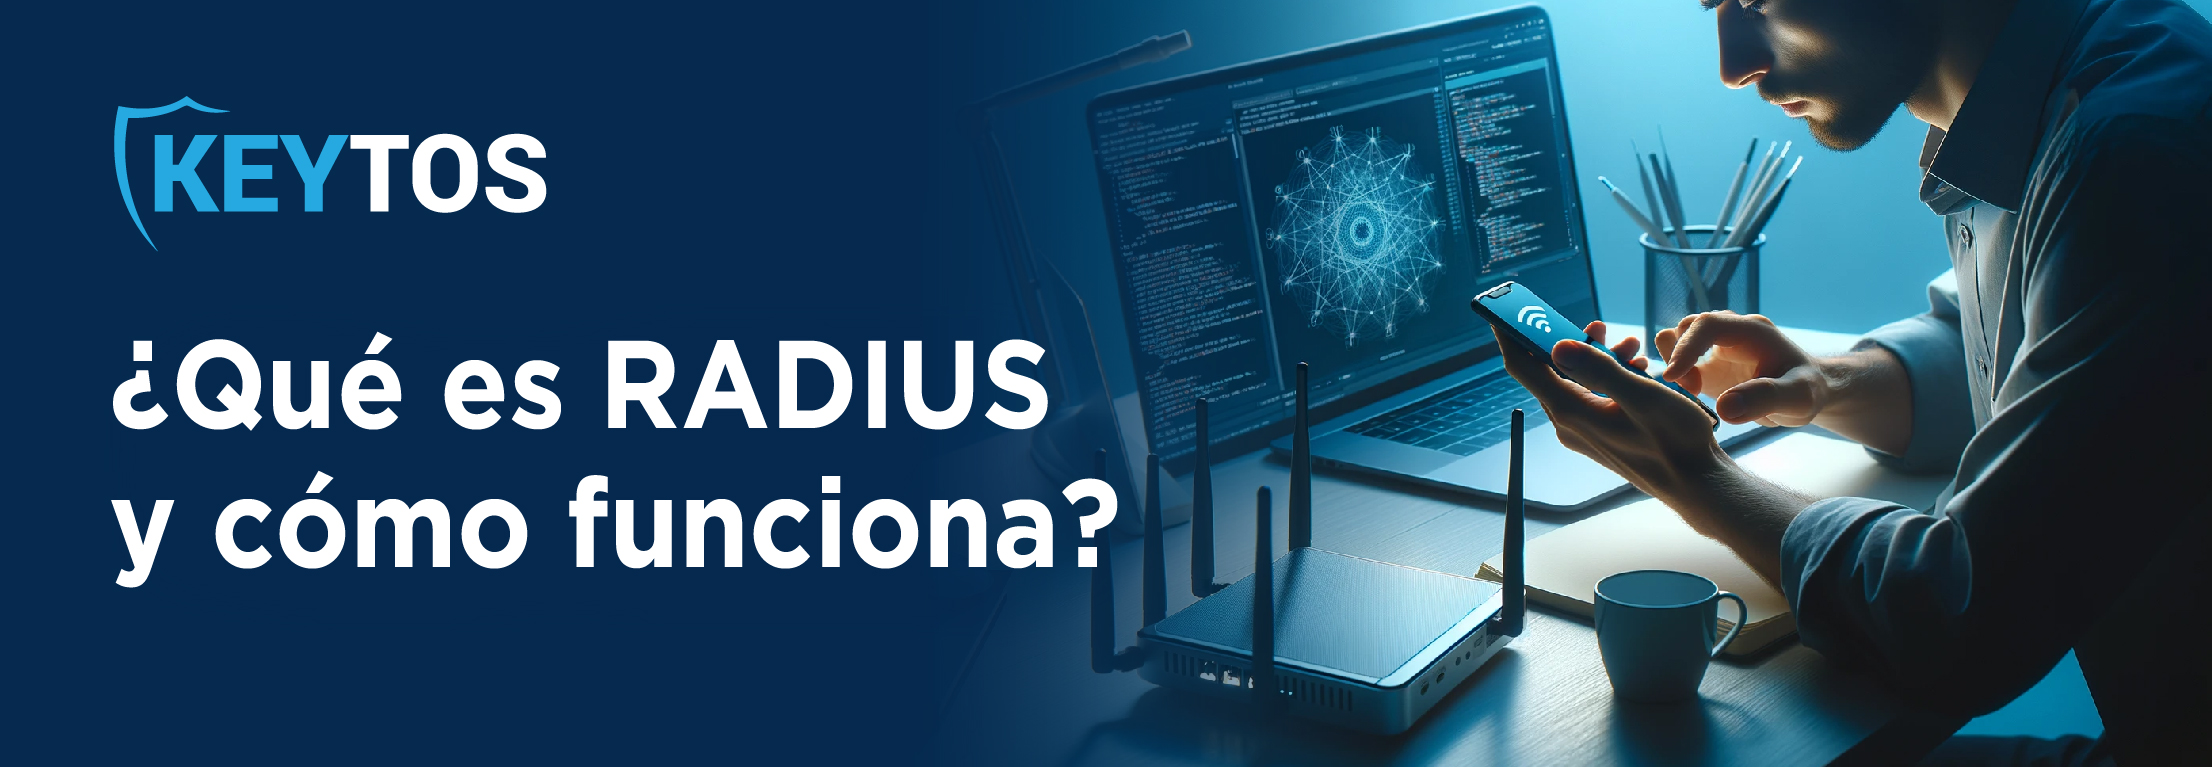 What is RADIUS and How it Works?